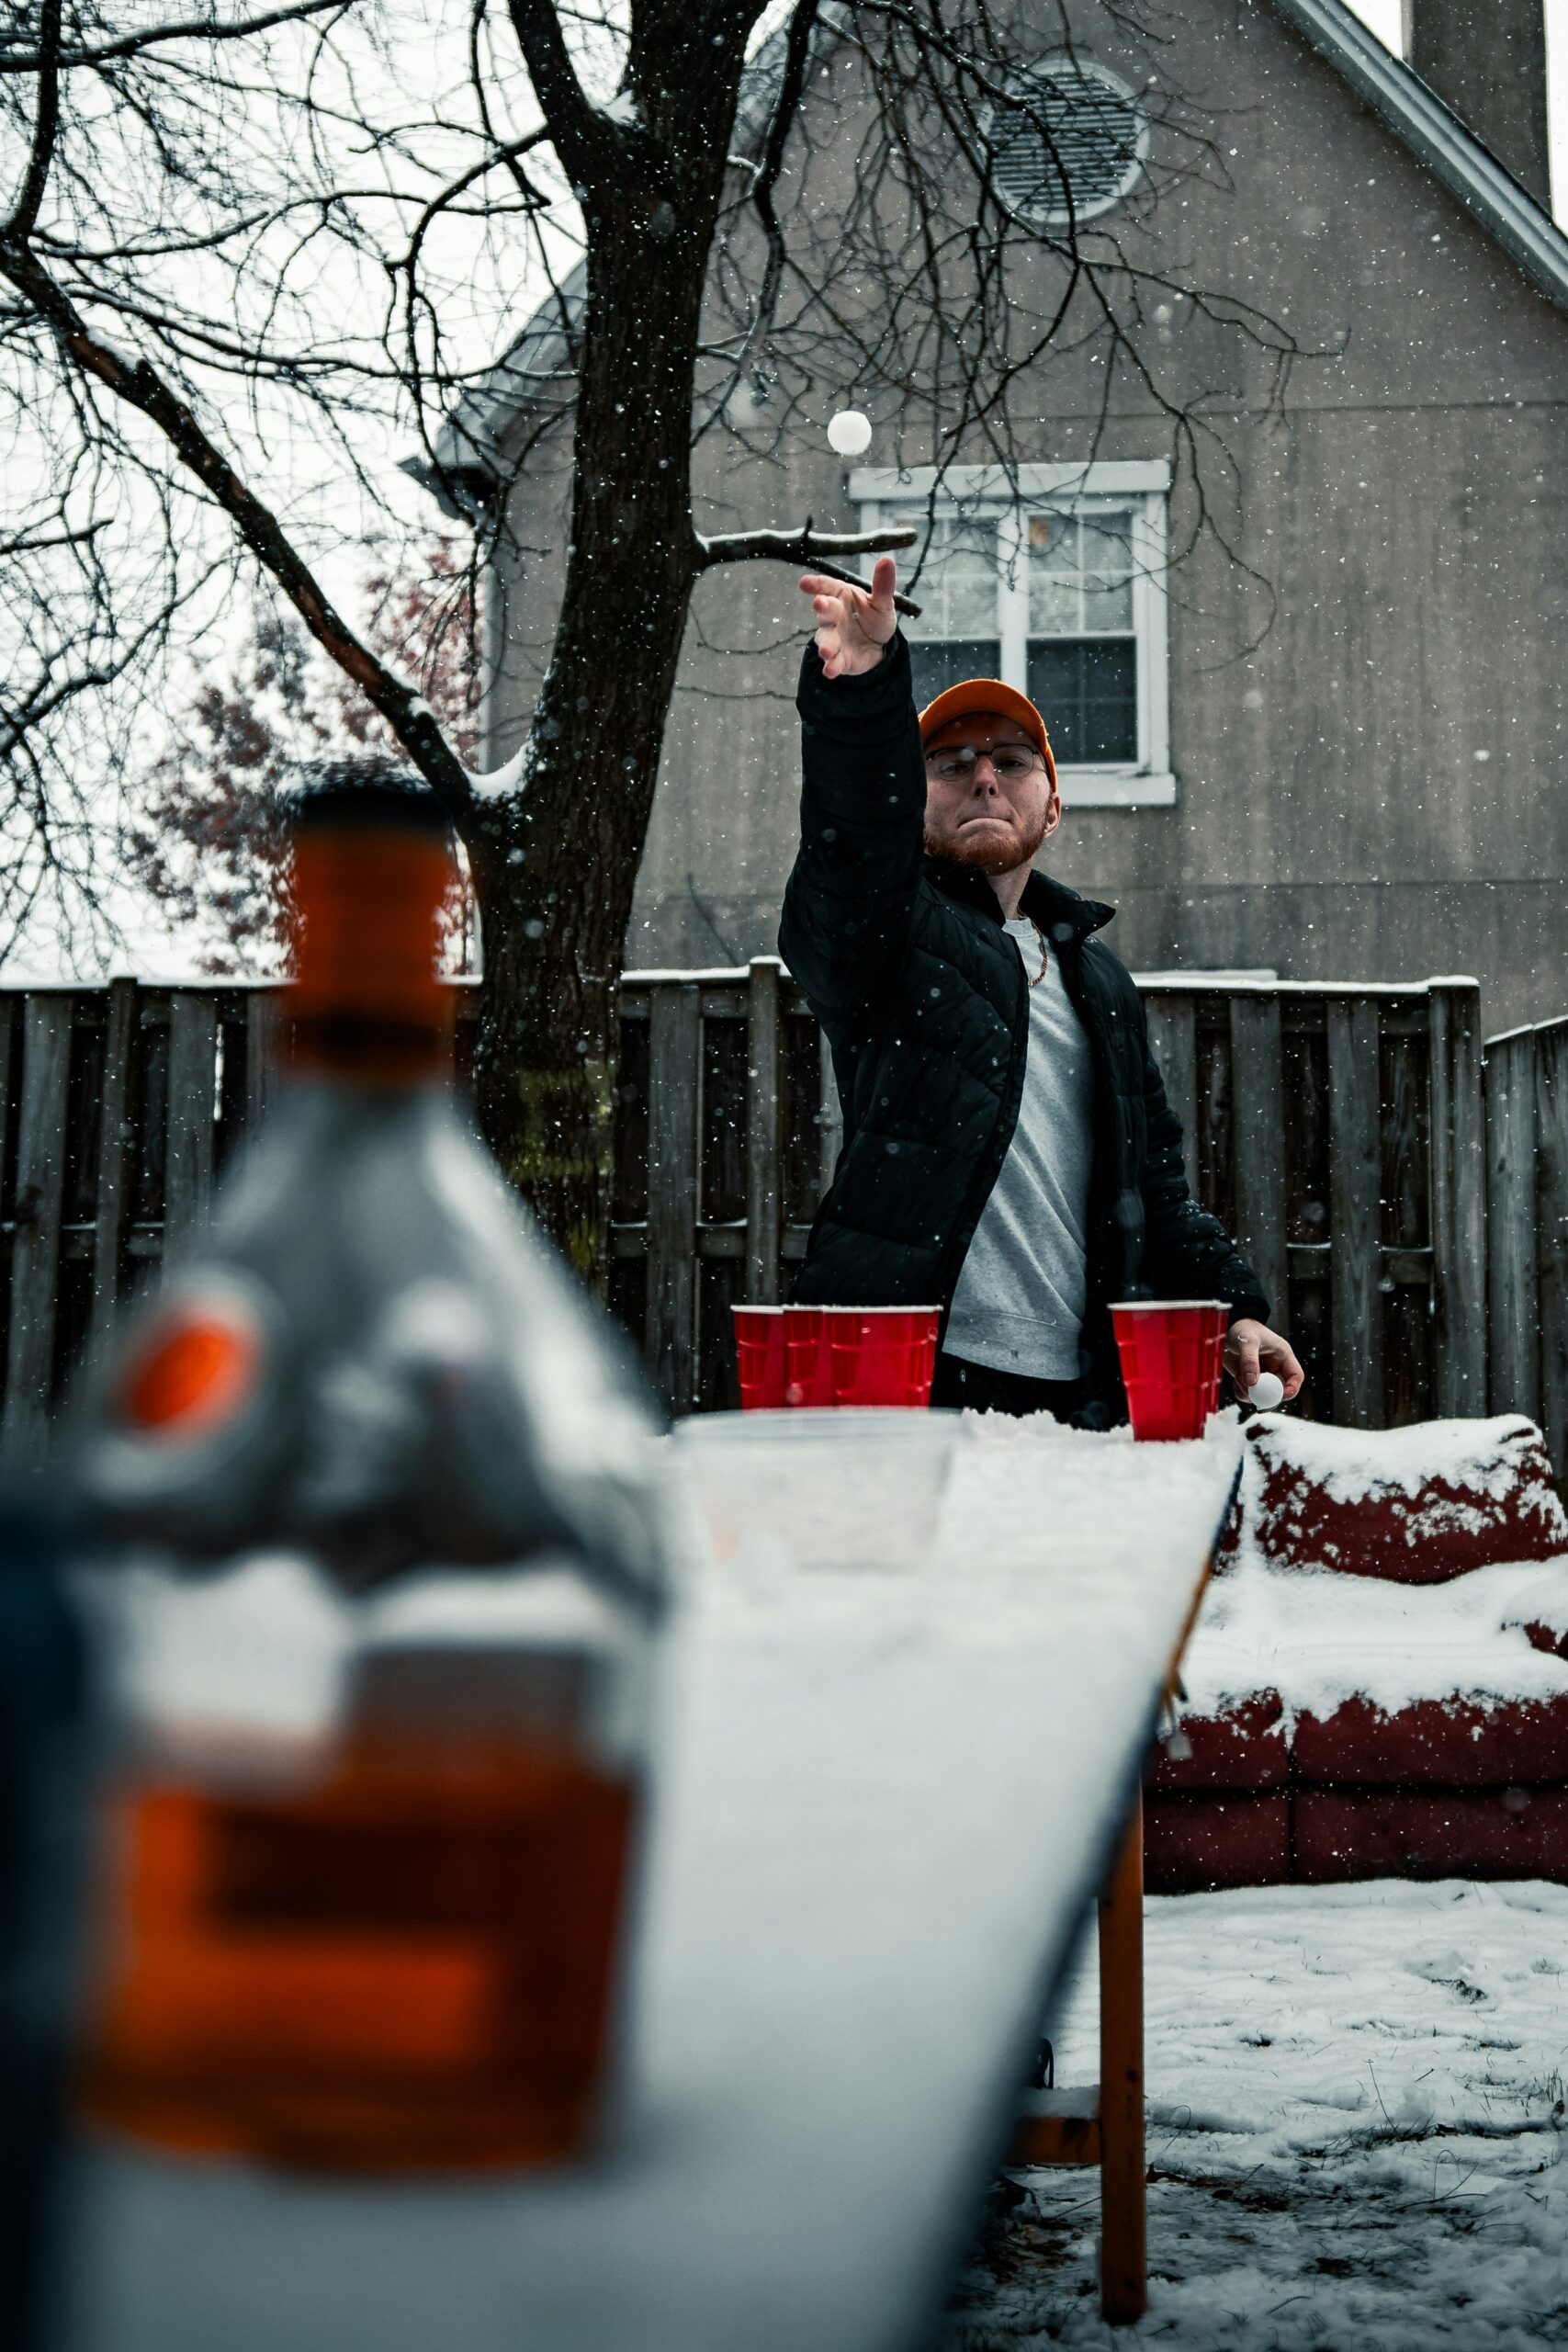 Fraternity student plays beer pong during party outside in the snow